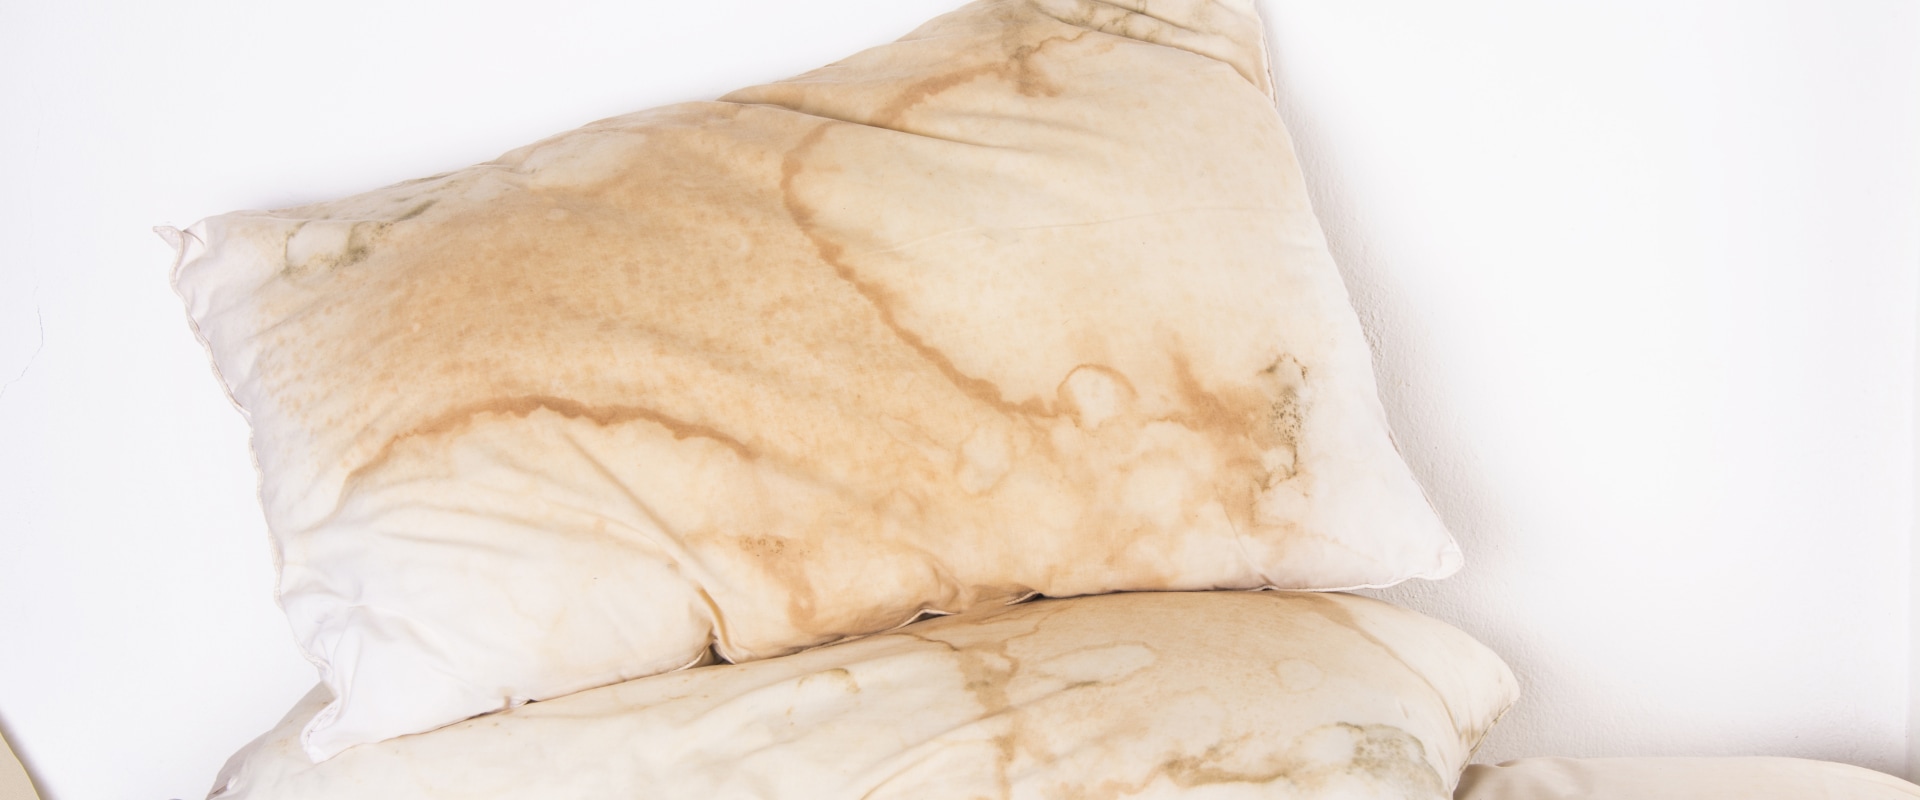 How often should you wash your pillows and cushions?